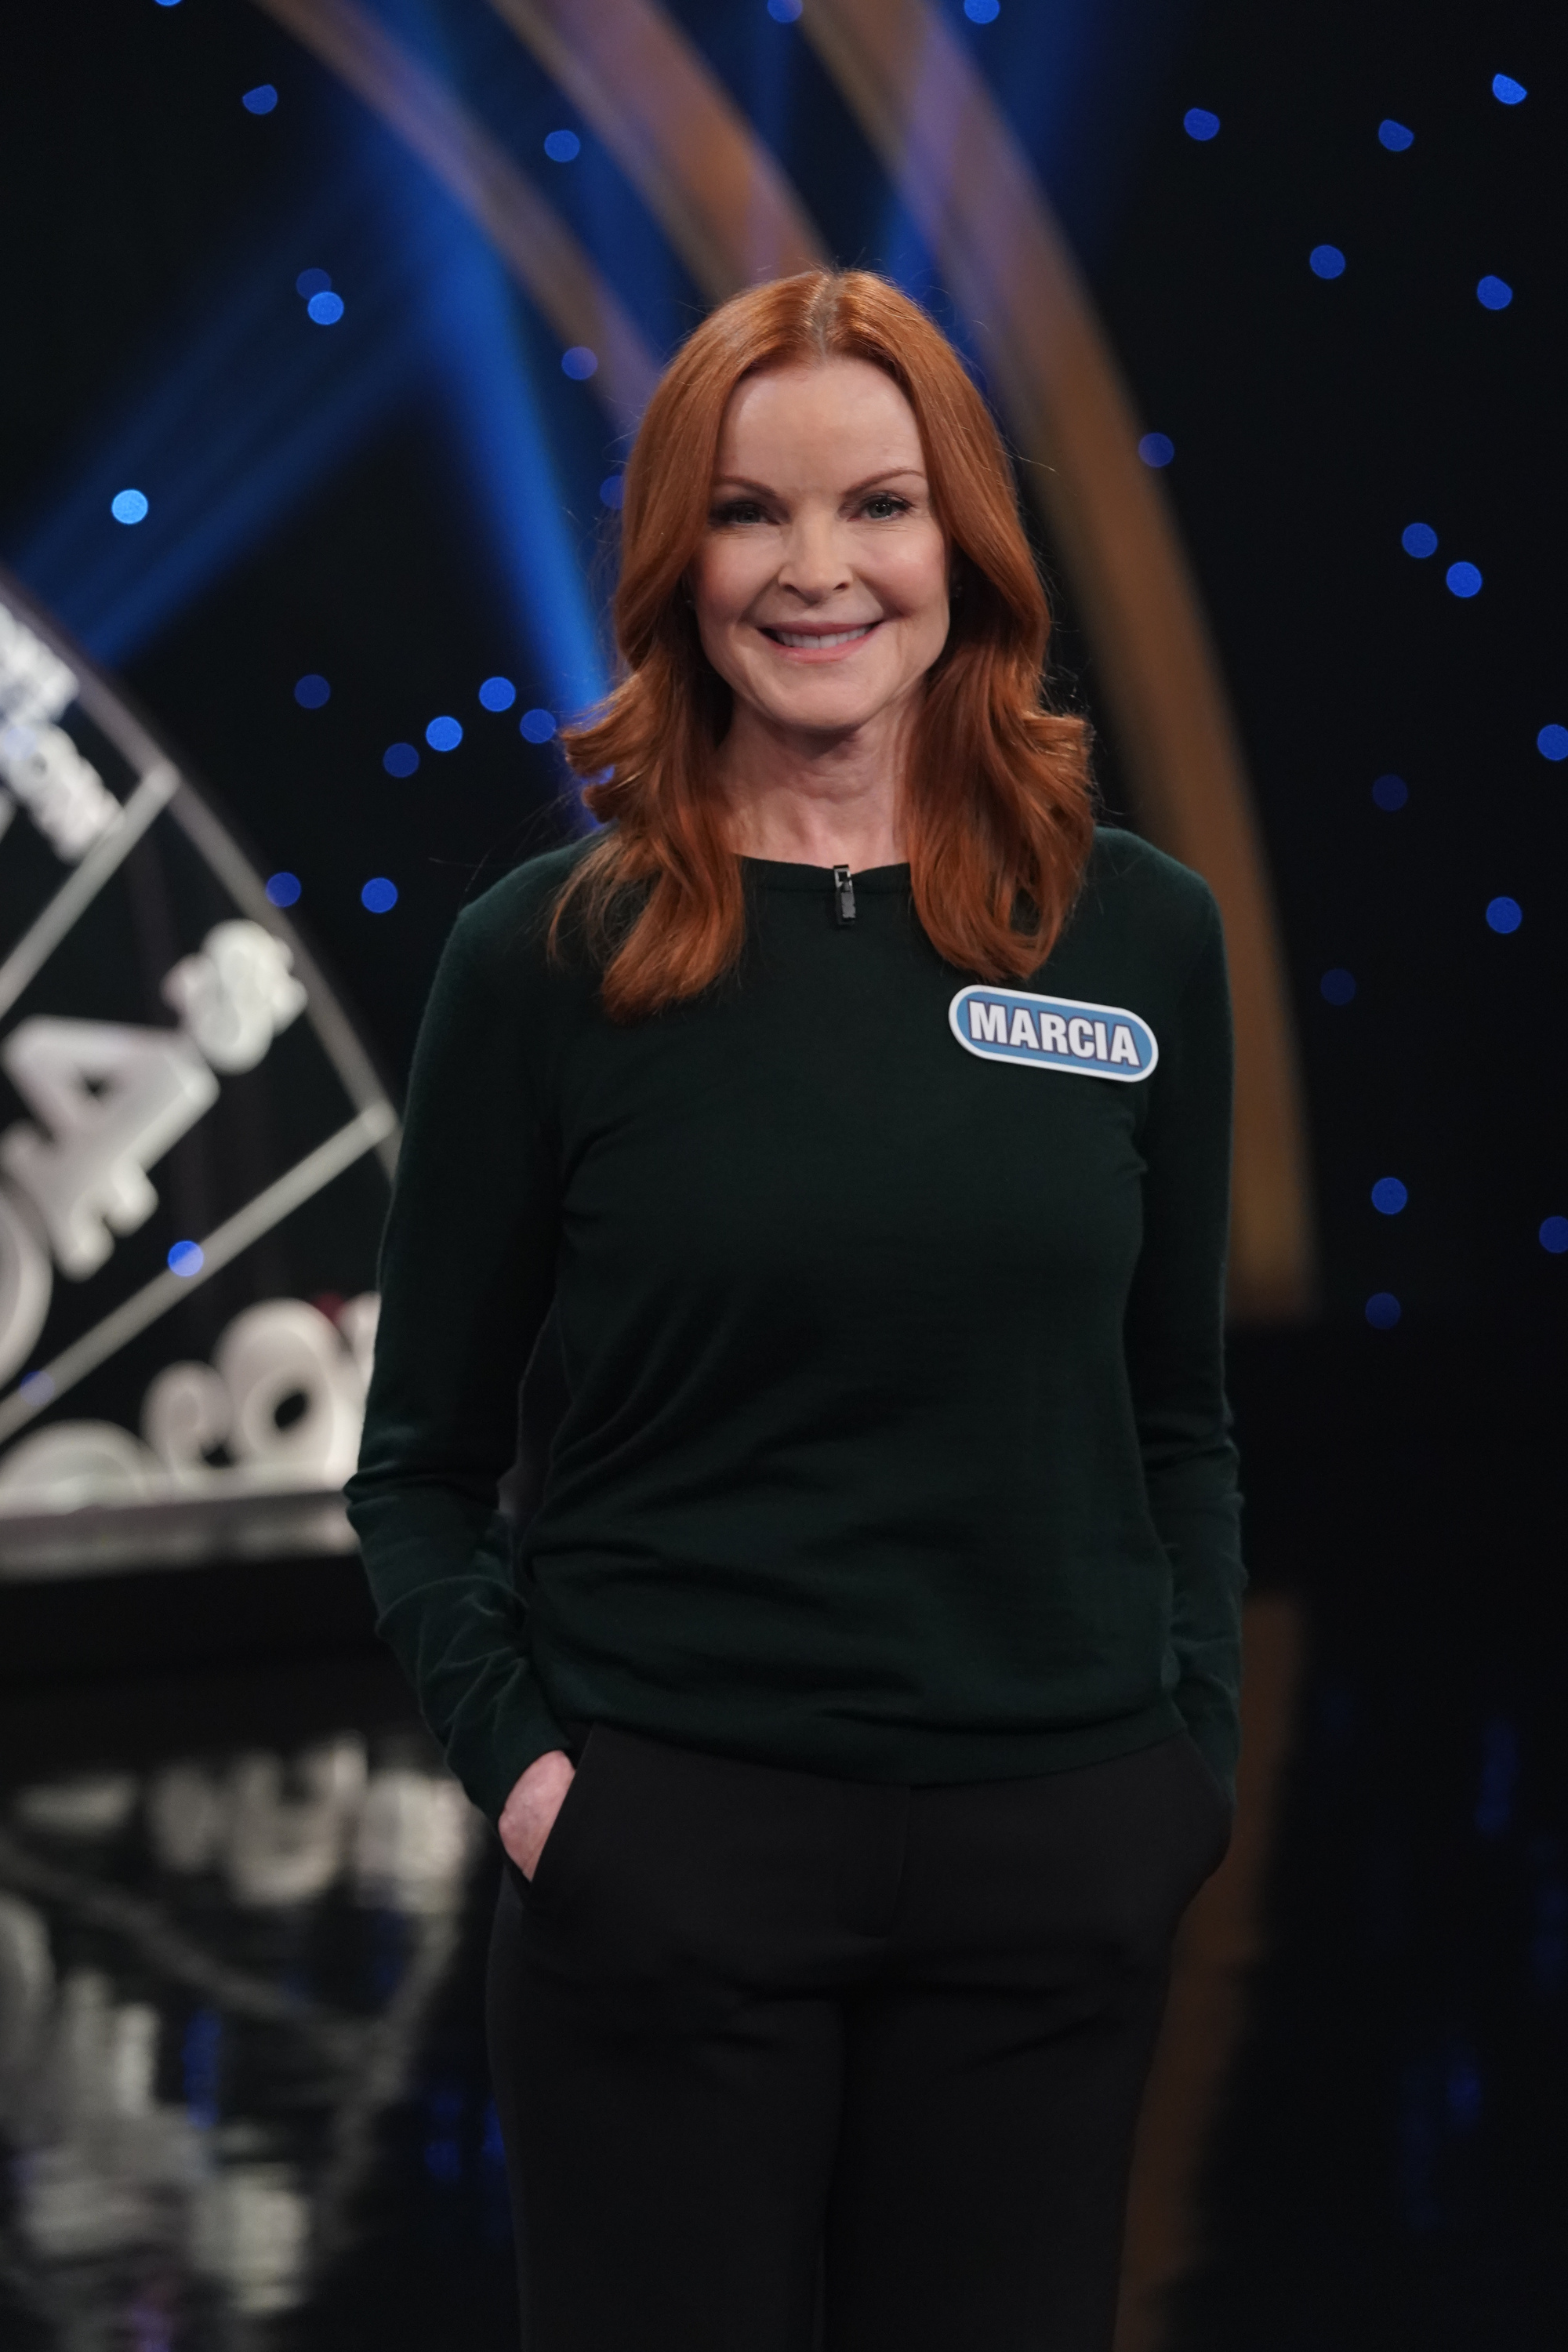 Marcia Cross on "Celebrity Wheel of Fortune" on December 30, 2021. | Source: Getty Images